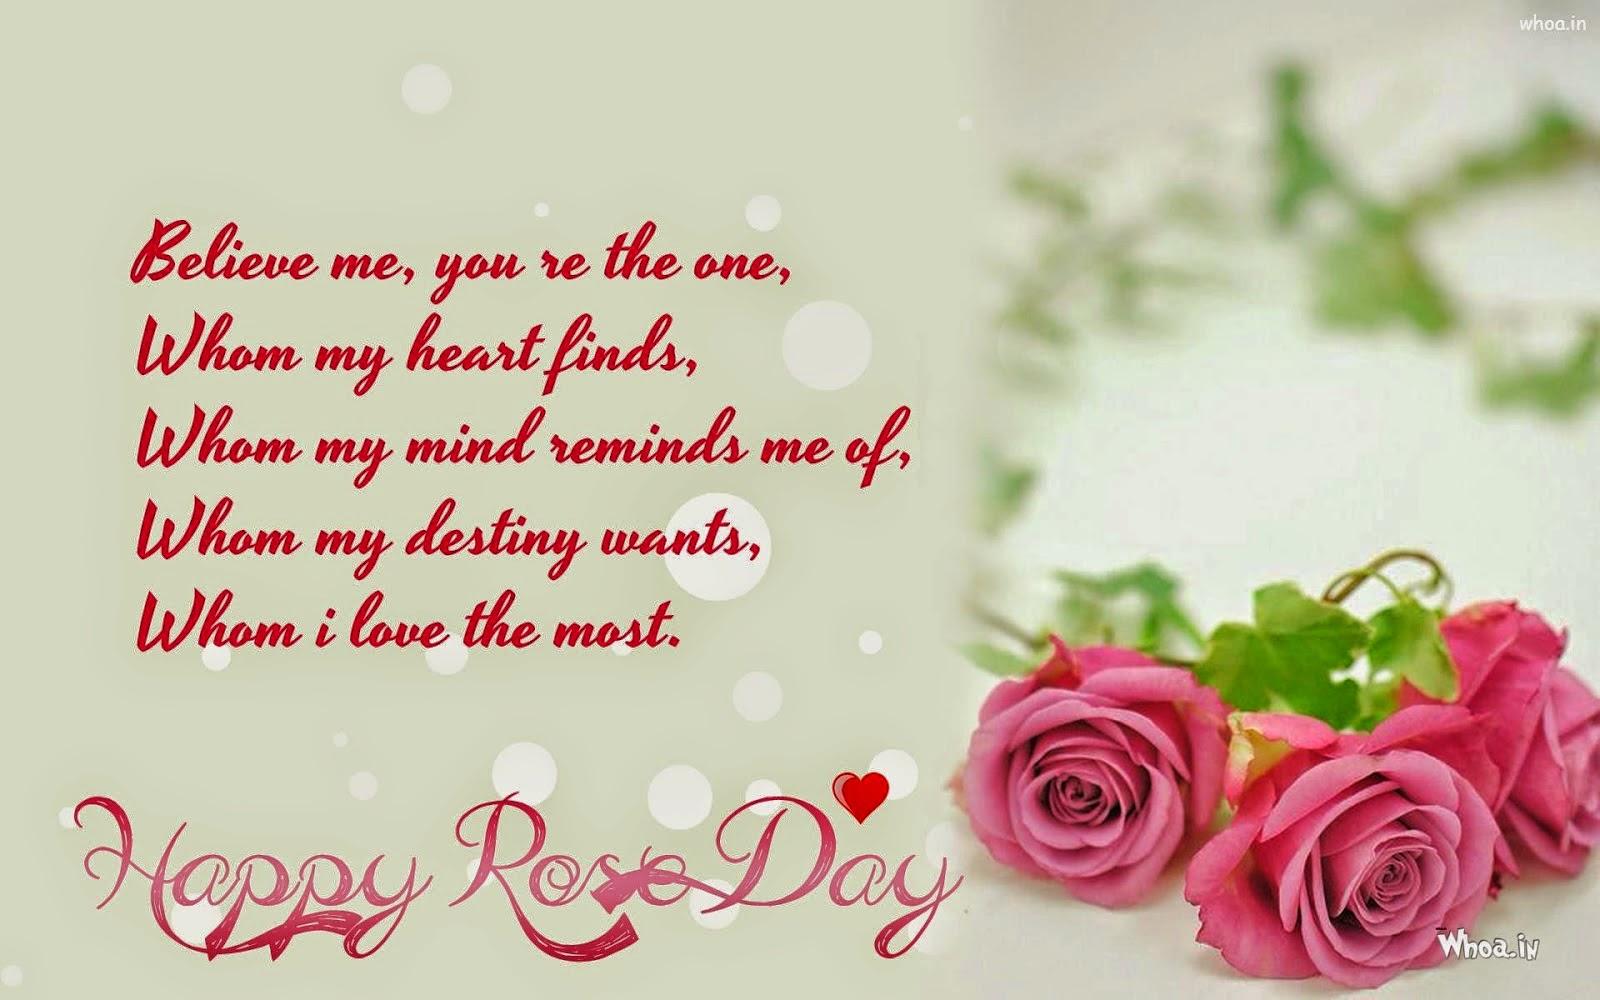 Rose Day 2019 Image Rose Day Quotes